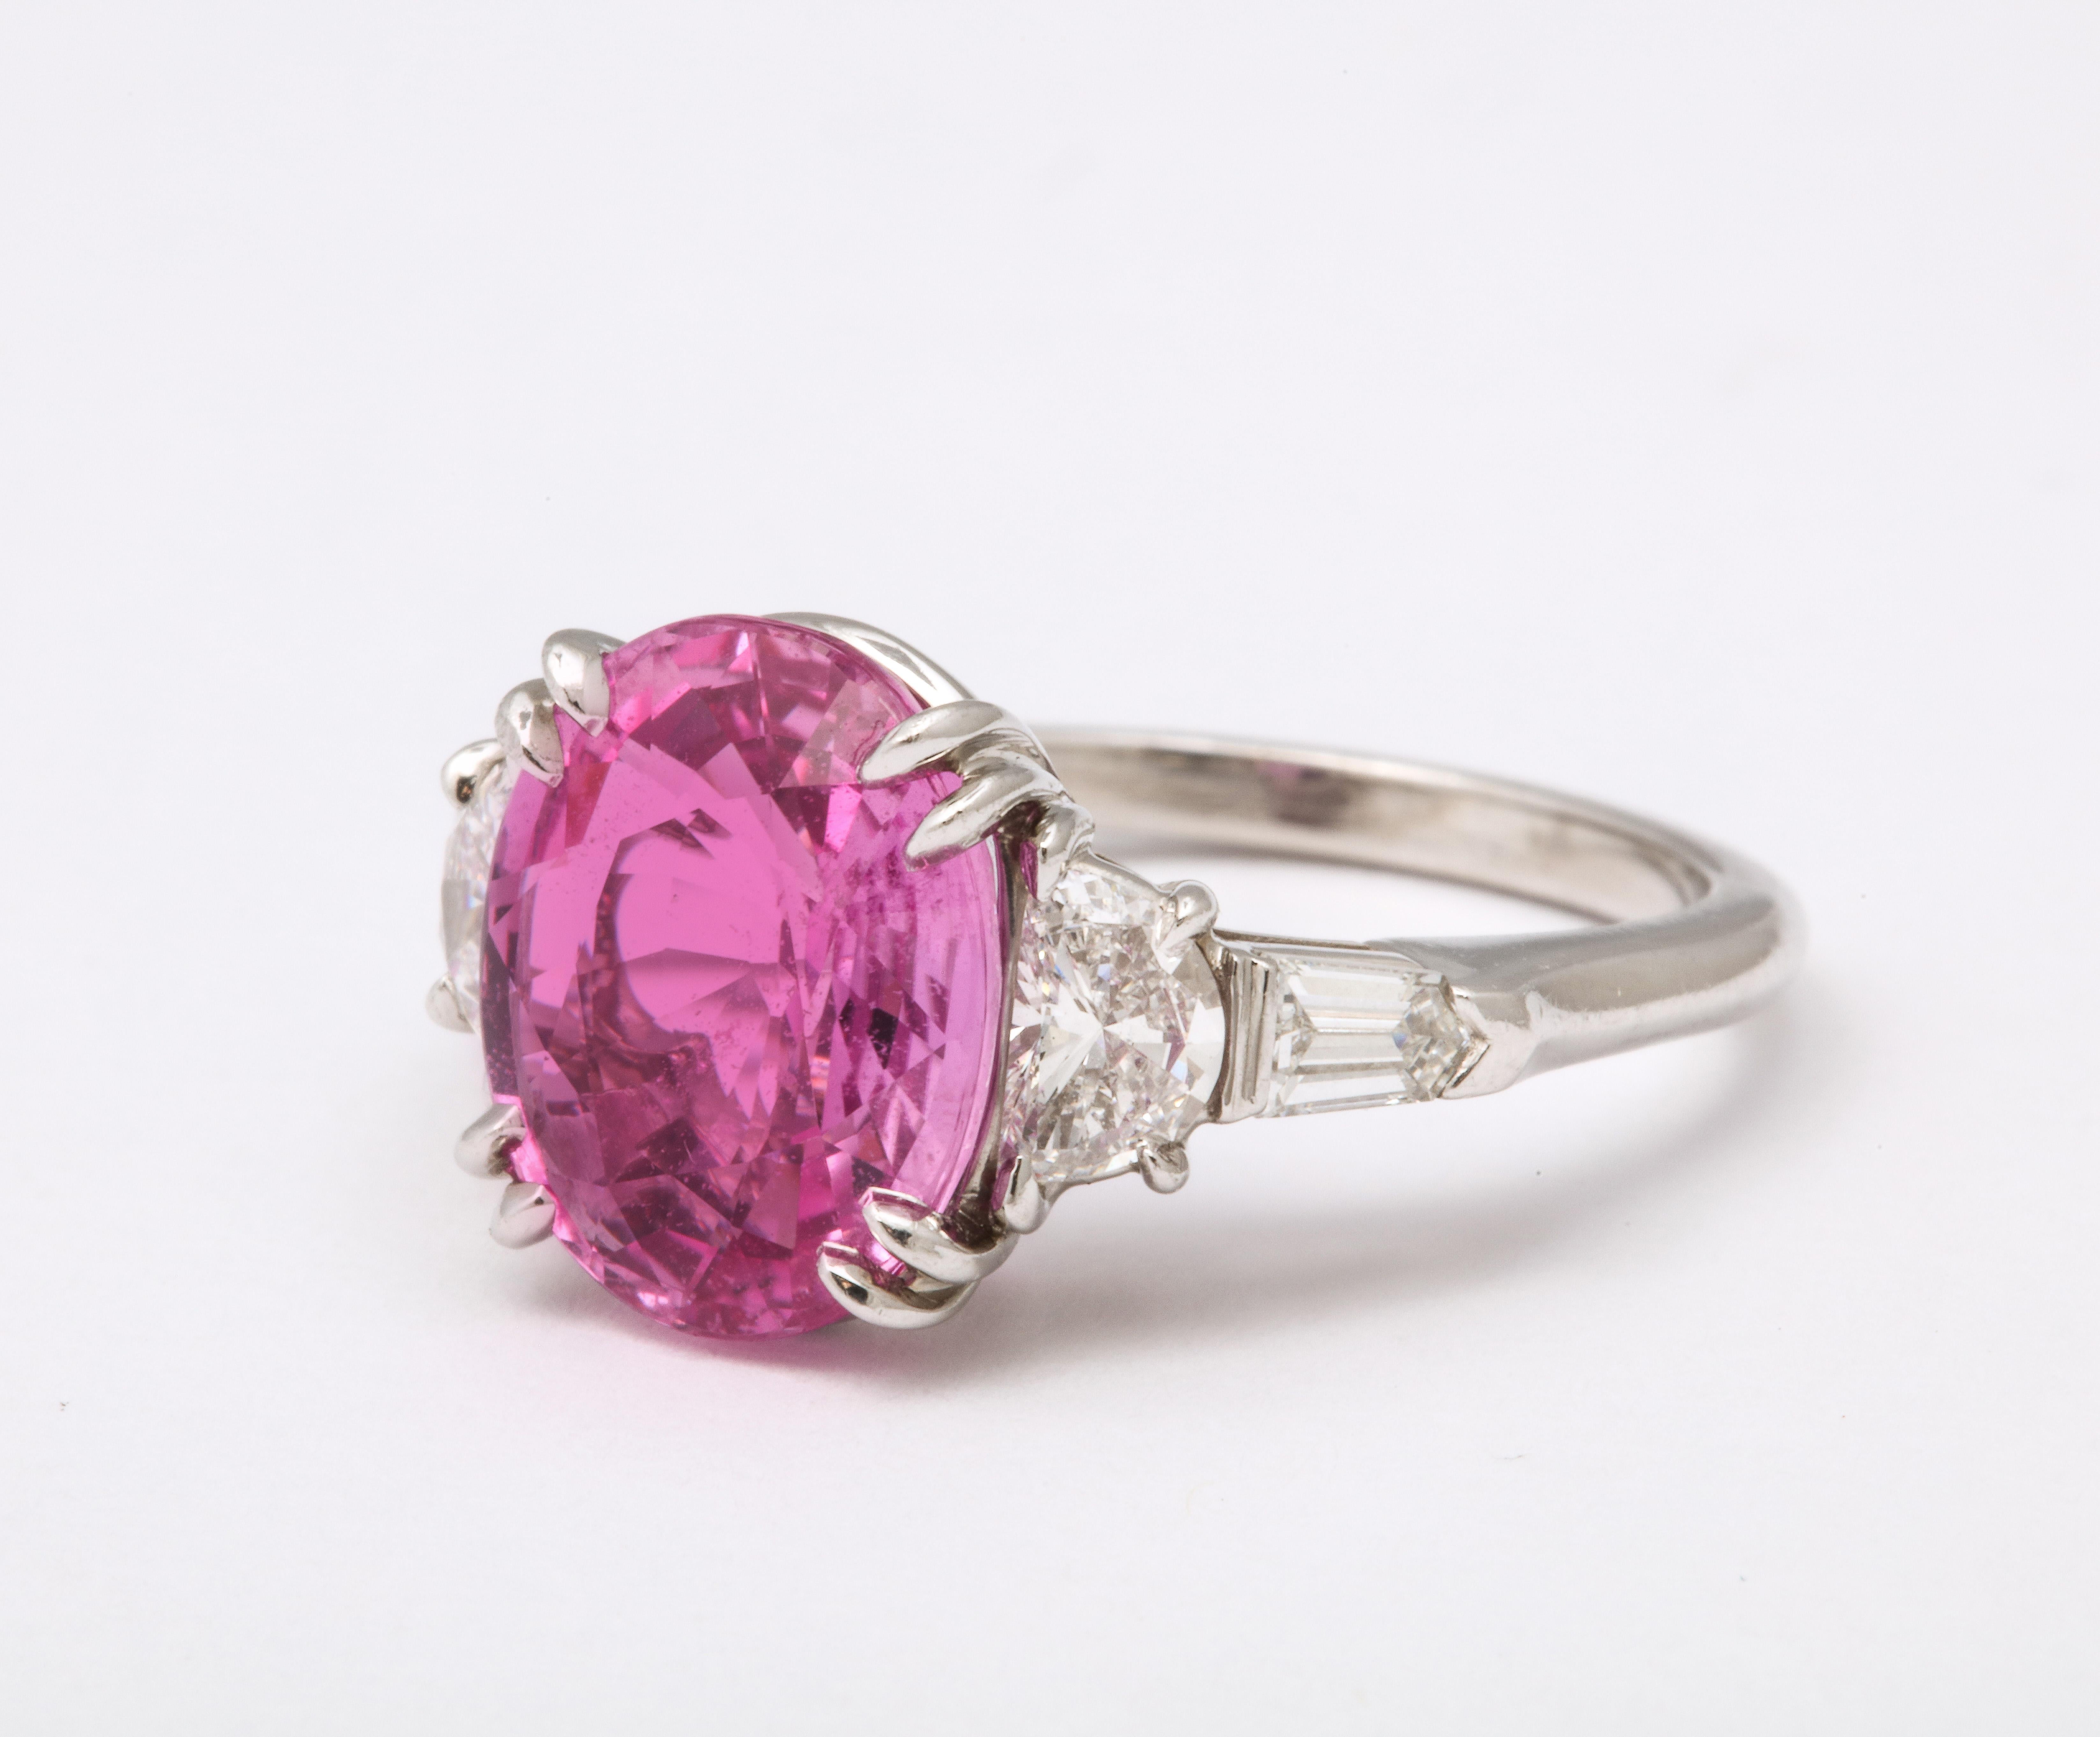 
Certified 5.15 carat oval Pink Sapphire 

.88 carats of colorless white trapezoid and baguette cut diamonds

Set in platinum

Currently a size 6.5, this ring can easily be resized to any finger size.

The sapphire is certified by Christian Dunaigre